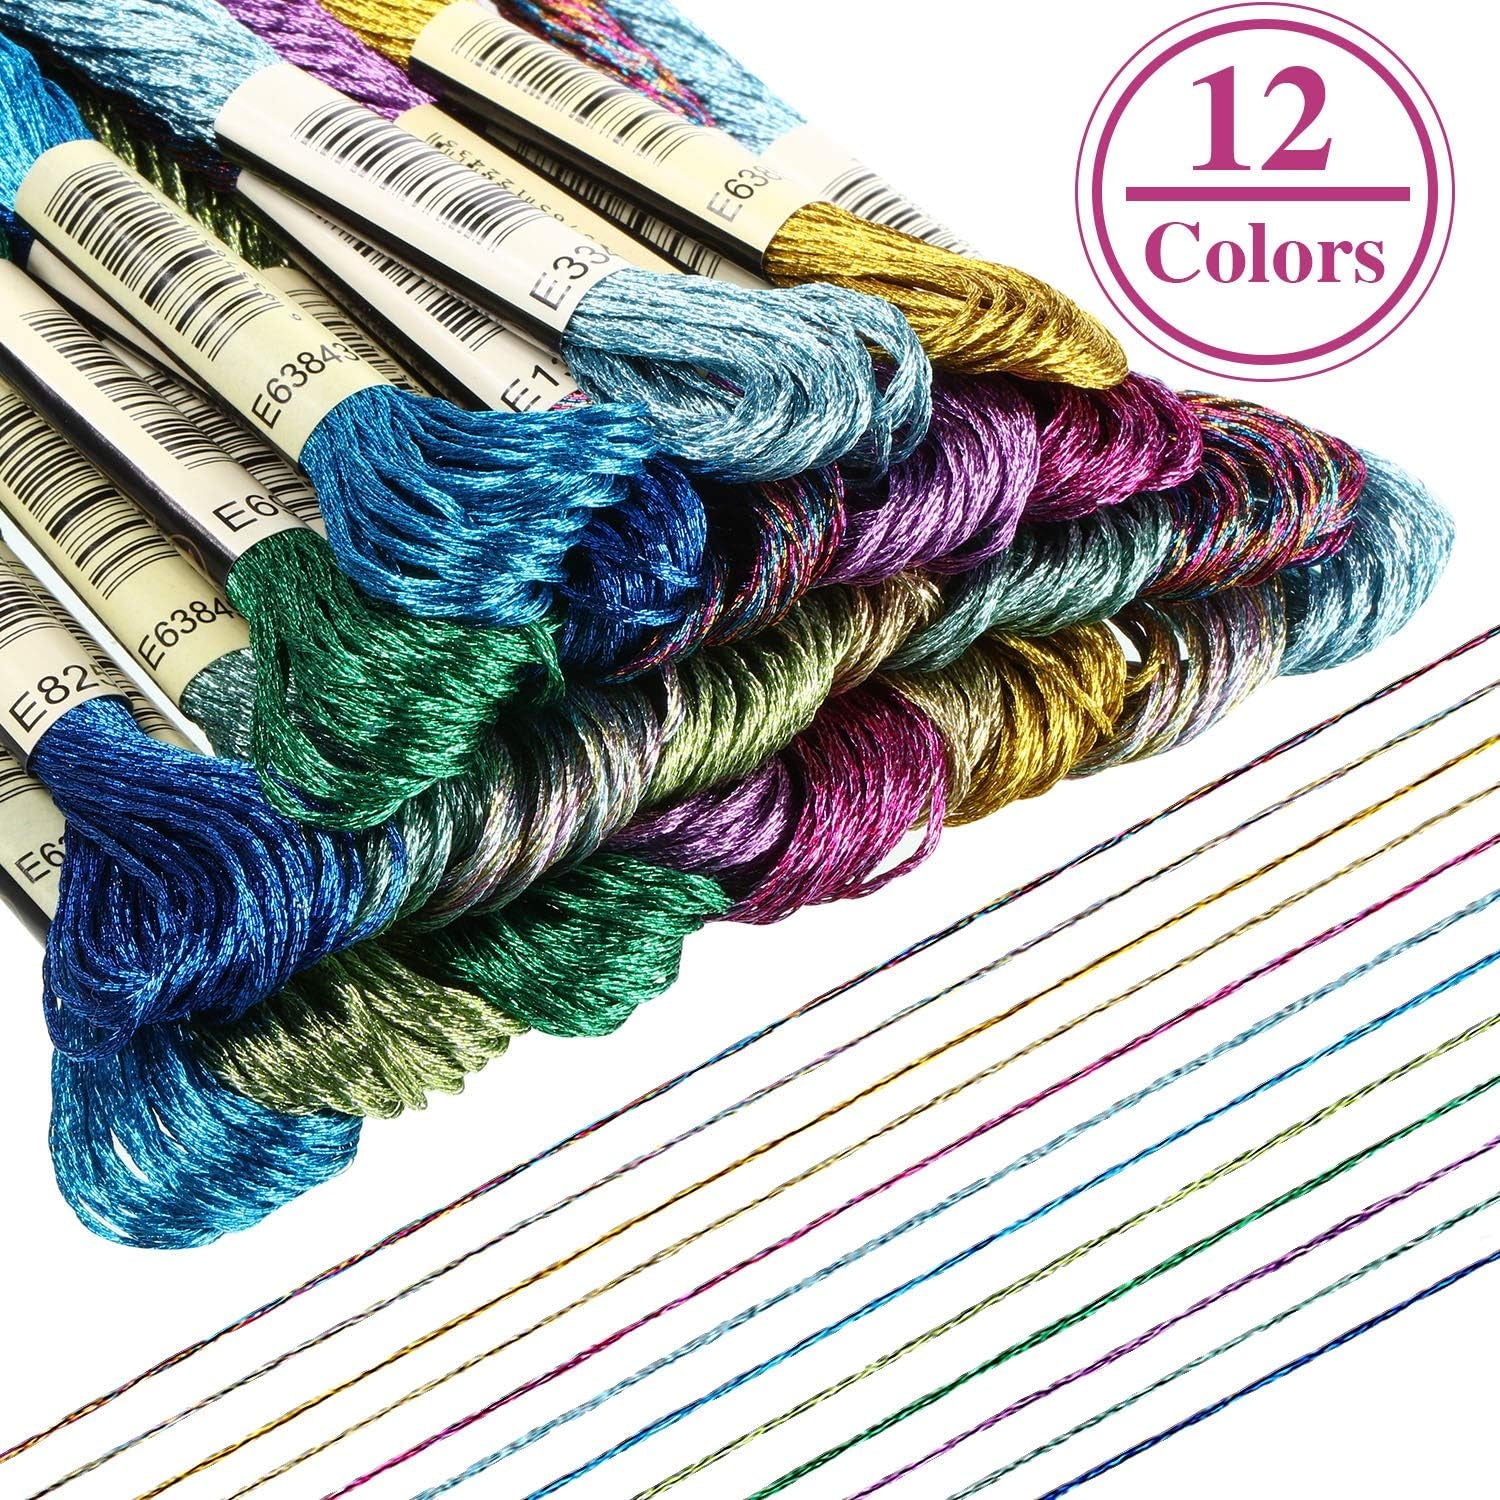 24 Pieces Metallic Embroidery Floss Multicolor Embroidery Skein Threads Glitter Embroidery Thread Cross Stitch Polyester Thread for Friendship Bracelets DIY Embroidery Thread Crafts